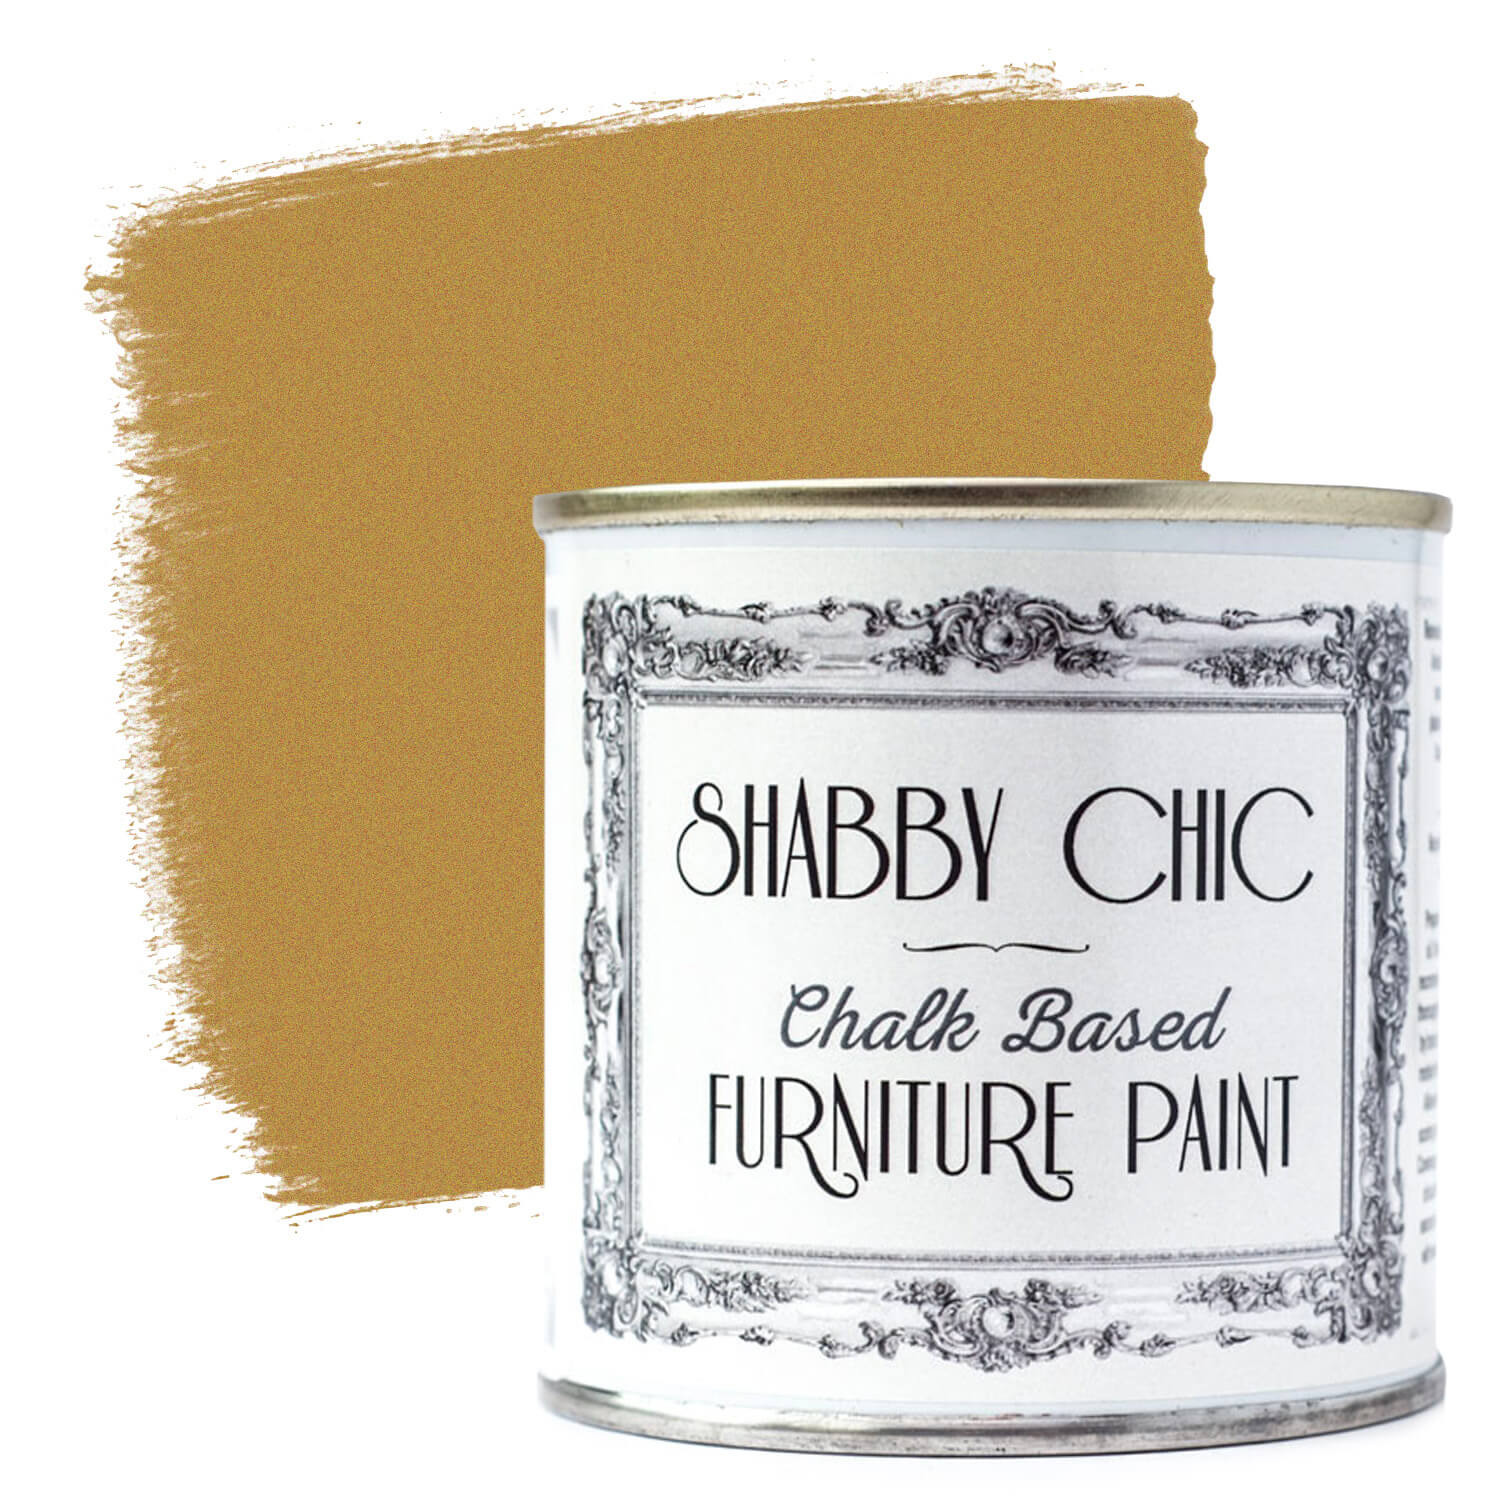 Shabby Chic Chalk Based Furniture Paint 250ml Antique Gold